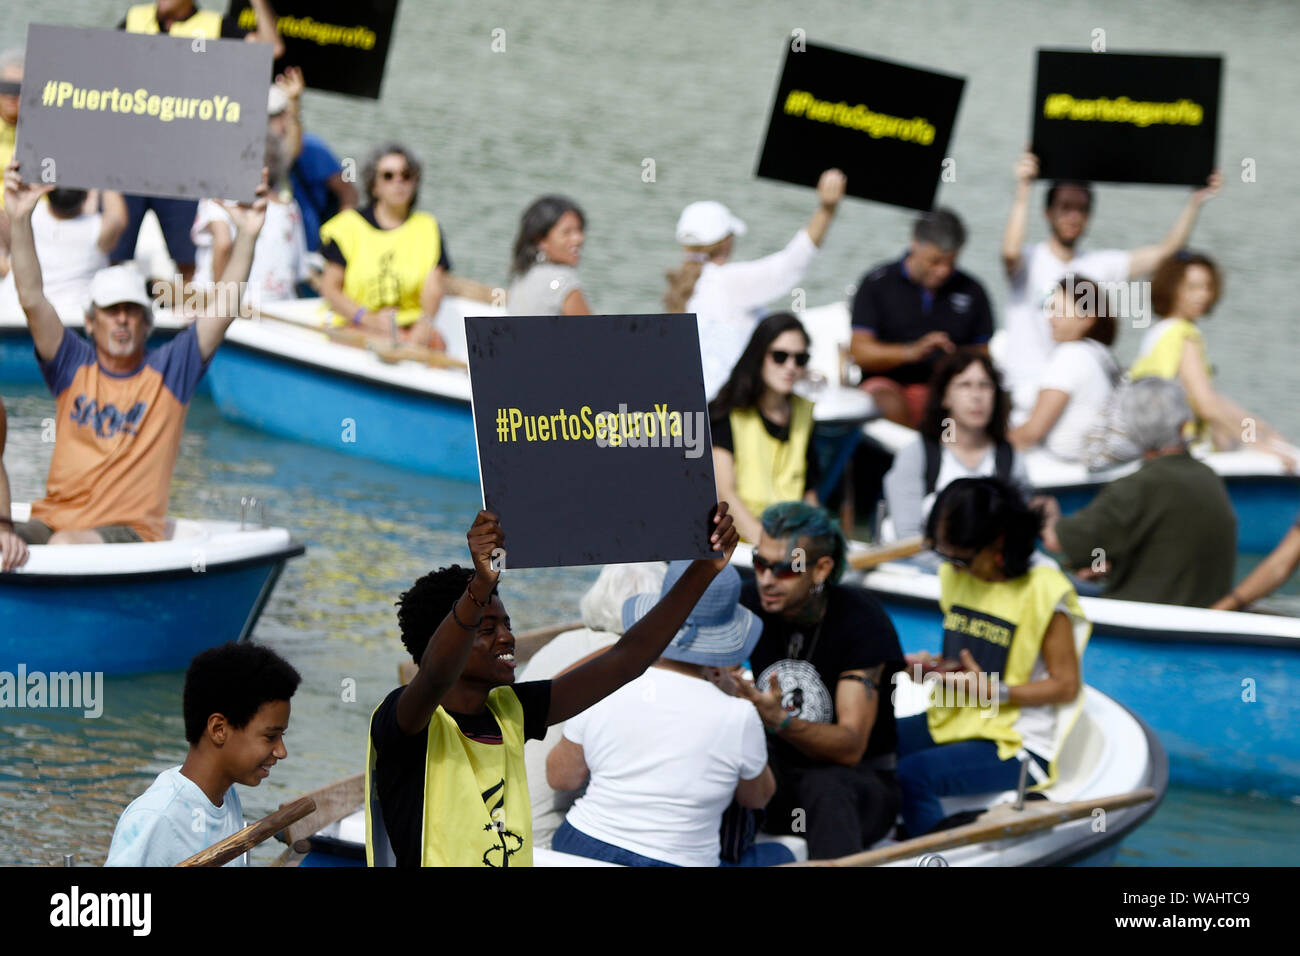 Madrid, Spain. 20th Aug, 2019. Dozens of people in small boats and with signs that read: “#PuertoSeguroYa”, participate in an action convened by the NGO Amnesty International, to demand a safe harbor immediately for rescued people in the Mediterranean, on Tuesday, August 20, 2019, in the pond of El Retiro park, in Madrid (Spain). The rescue ship of the NGO Proactiva Open Arms, which carries 151 rescued people on board from the Mediterranean for almost a month, he continues without finding a safe harbor where he can disembark and serve the rescued people. Credit: Pacific Press Agency/Alamy Live Stock Photo